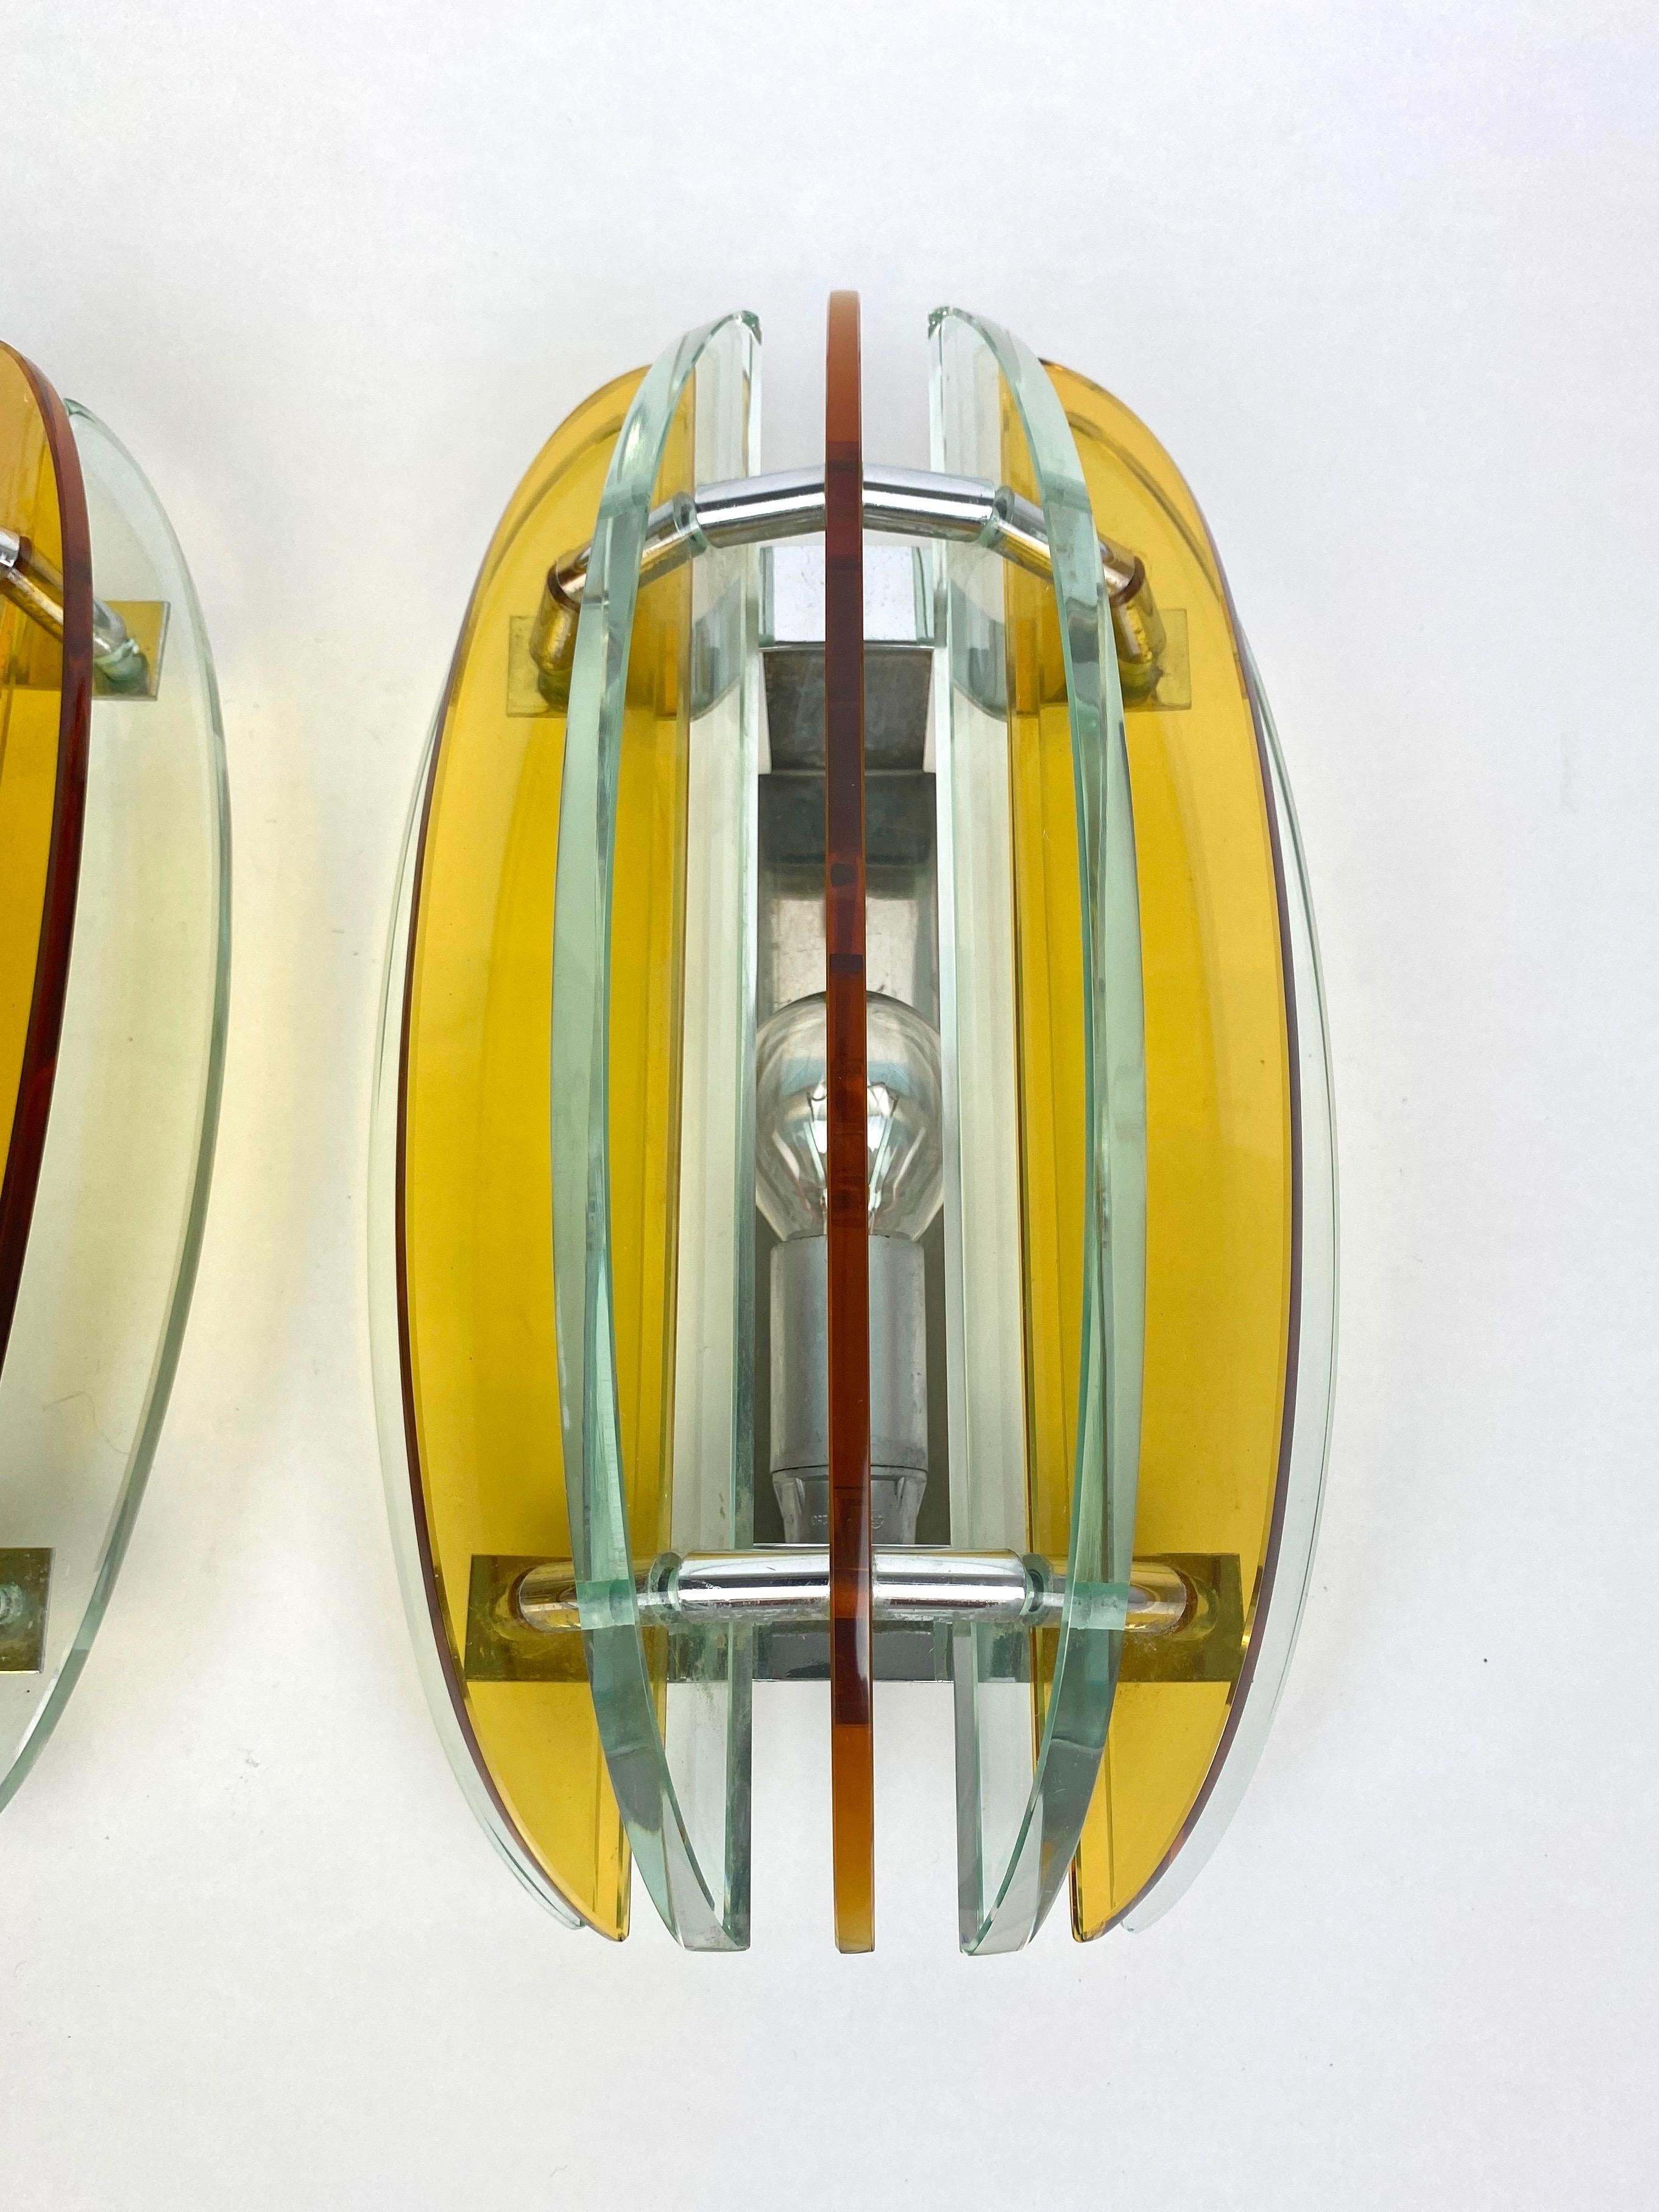 Italian Pair of Wall Sconces in Colored Glass and Chrome by Veca, Italy, 1970s